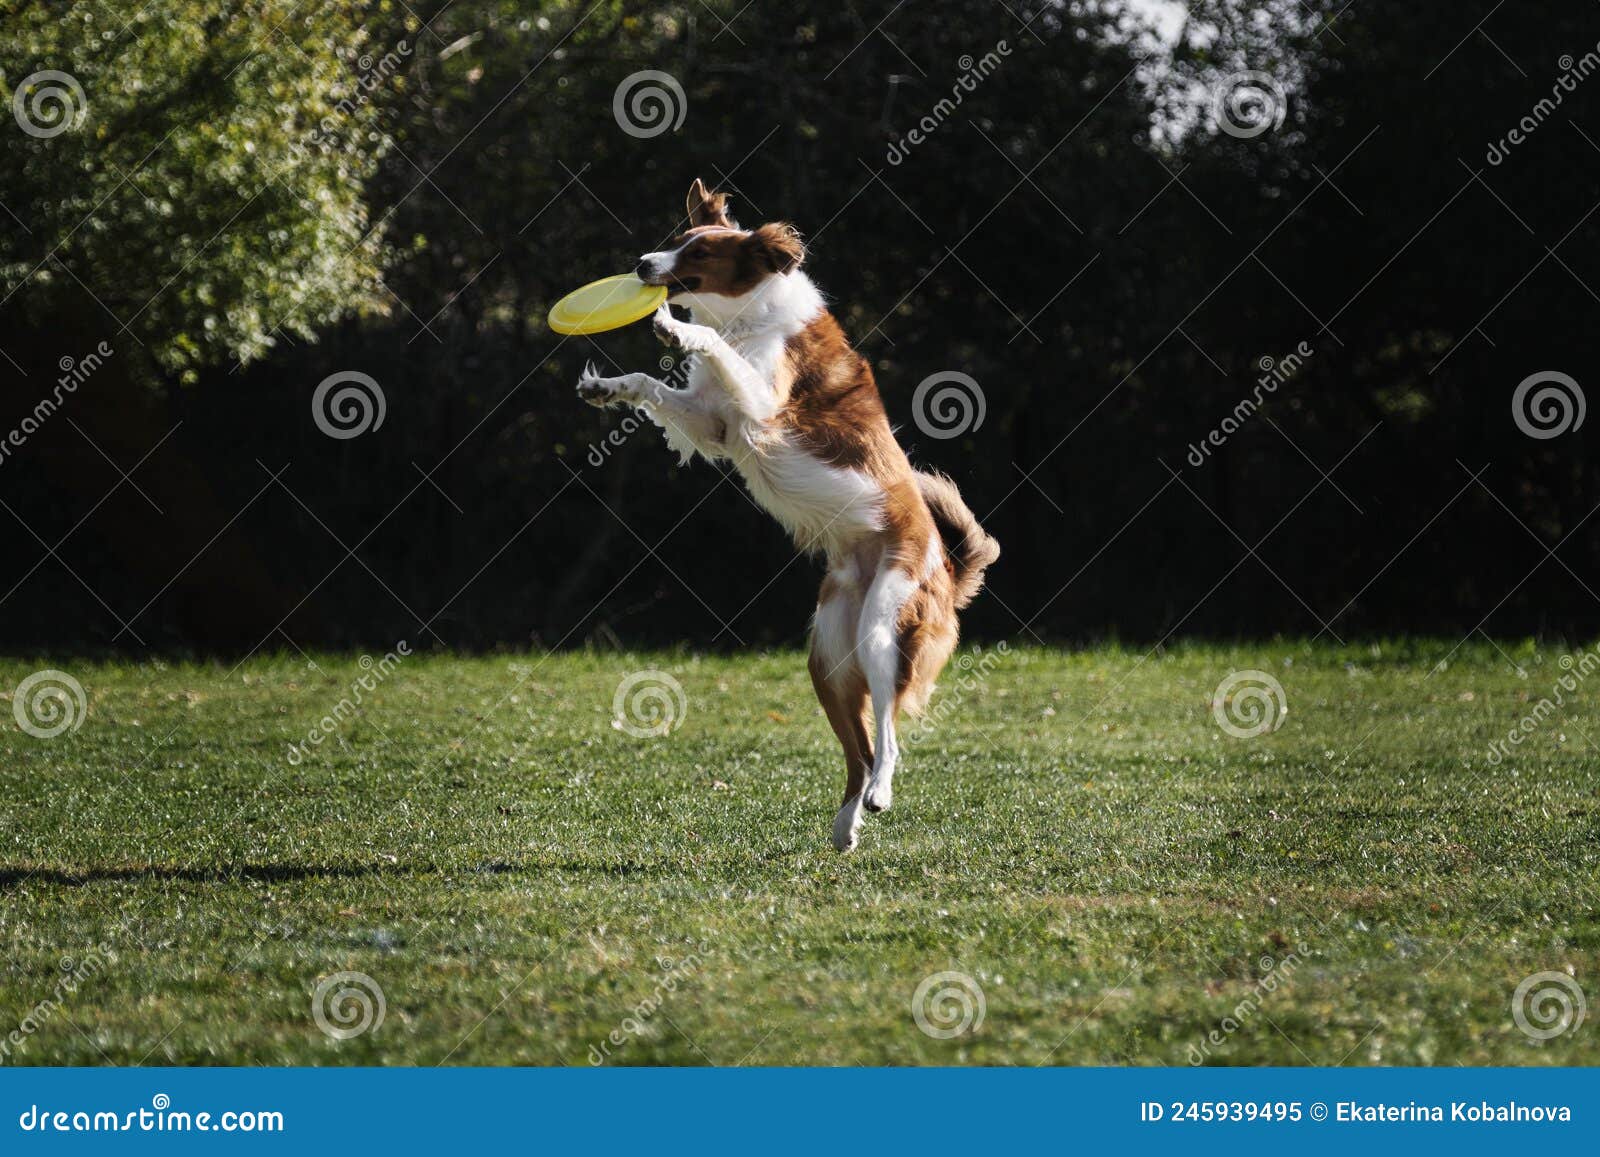 dog frisbee. competitions of dexterous dogs. a border collie of red sable color jumps and catches a flying saucer in flight with